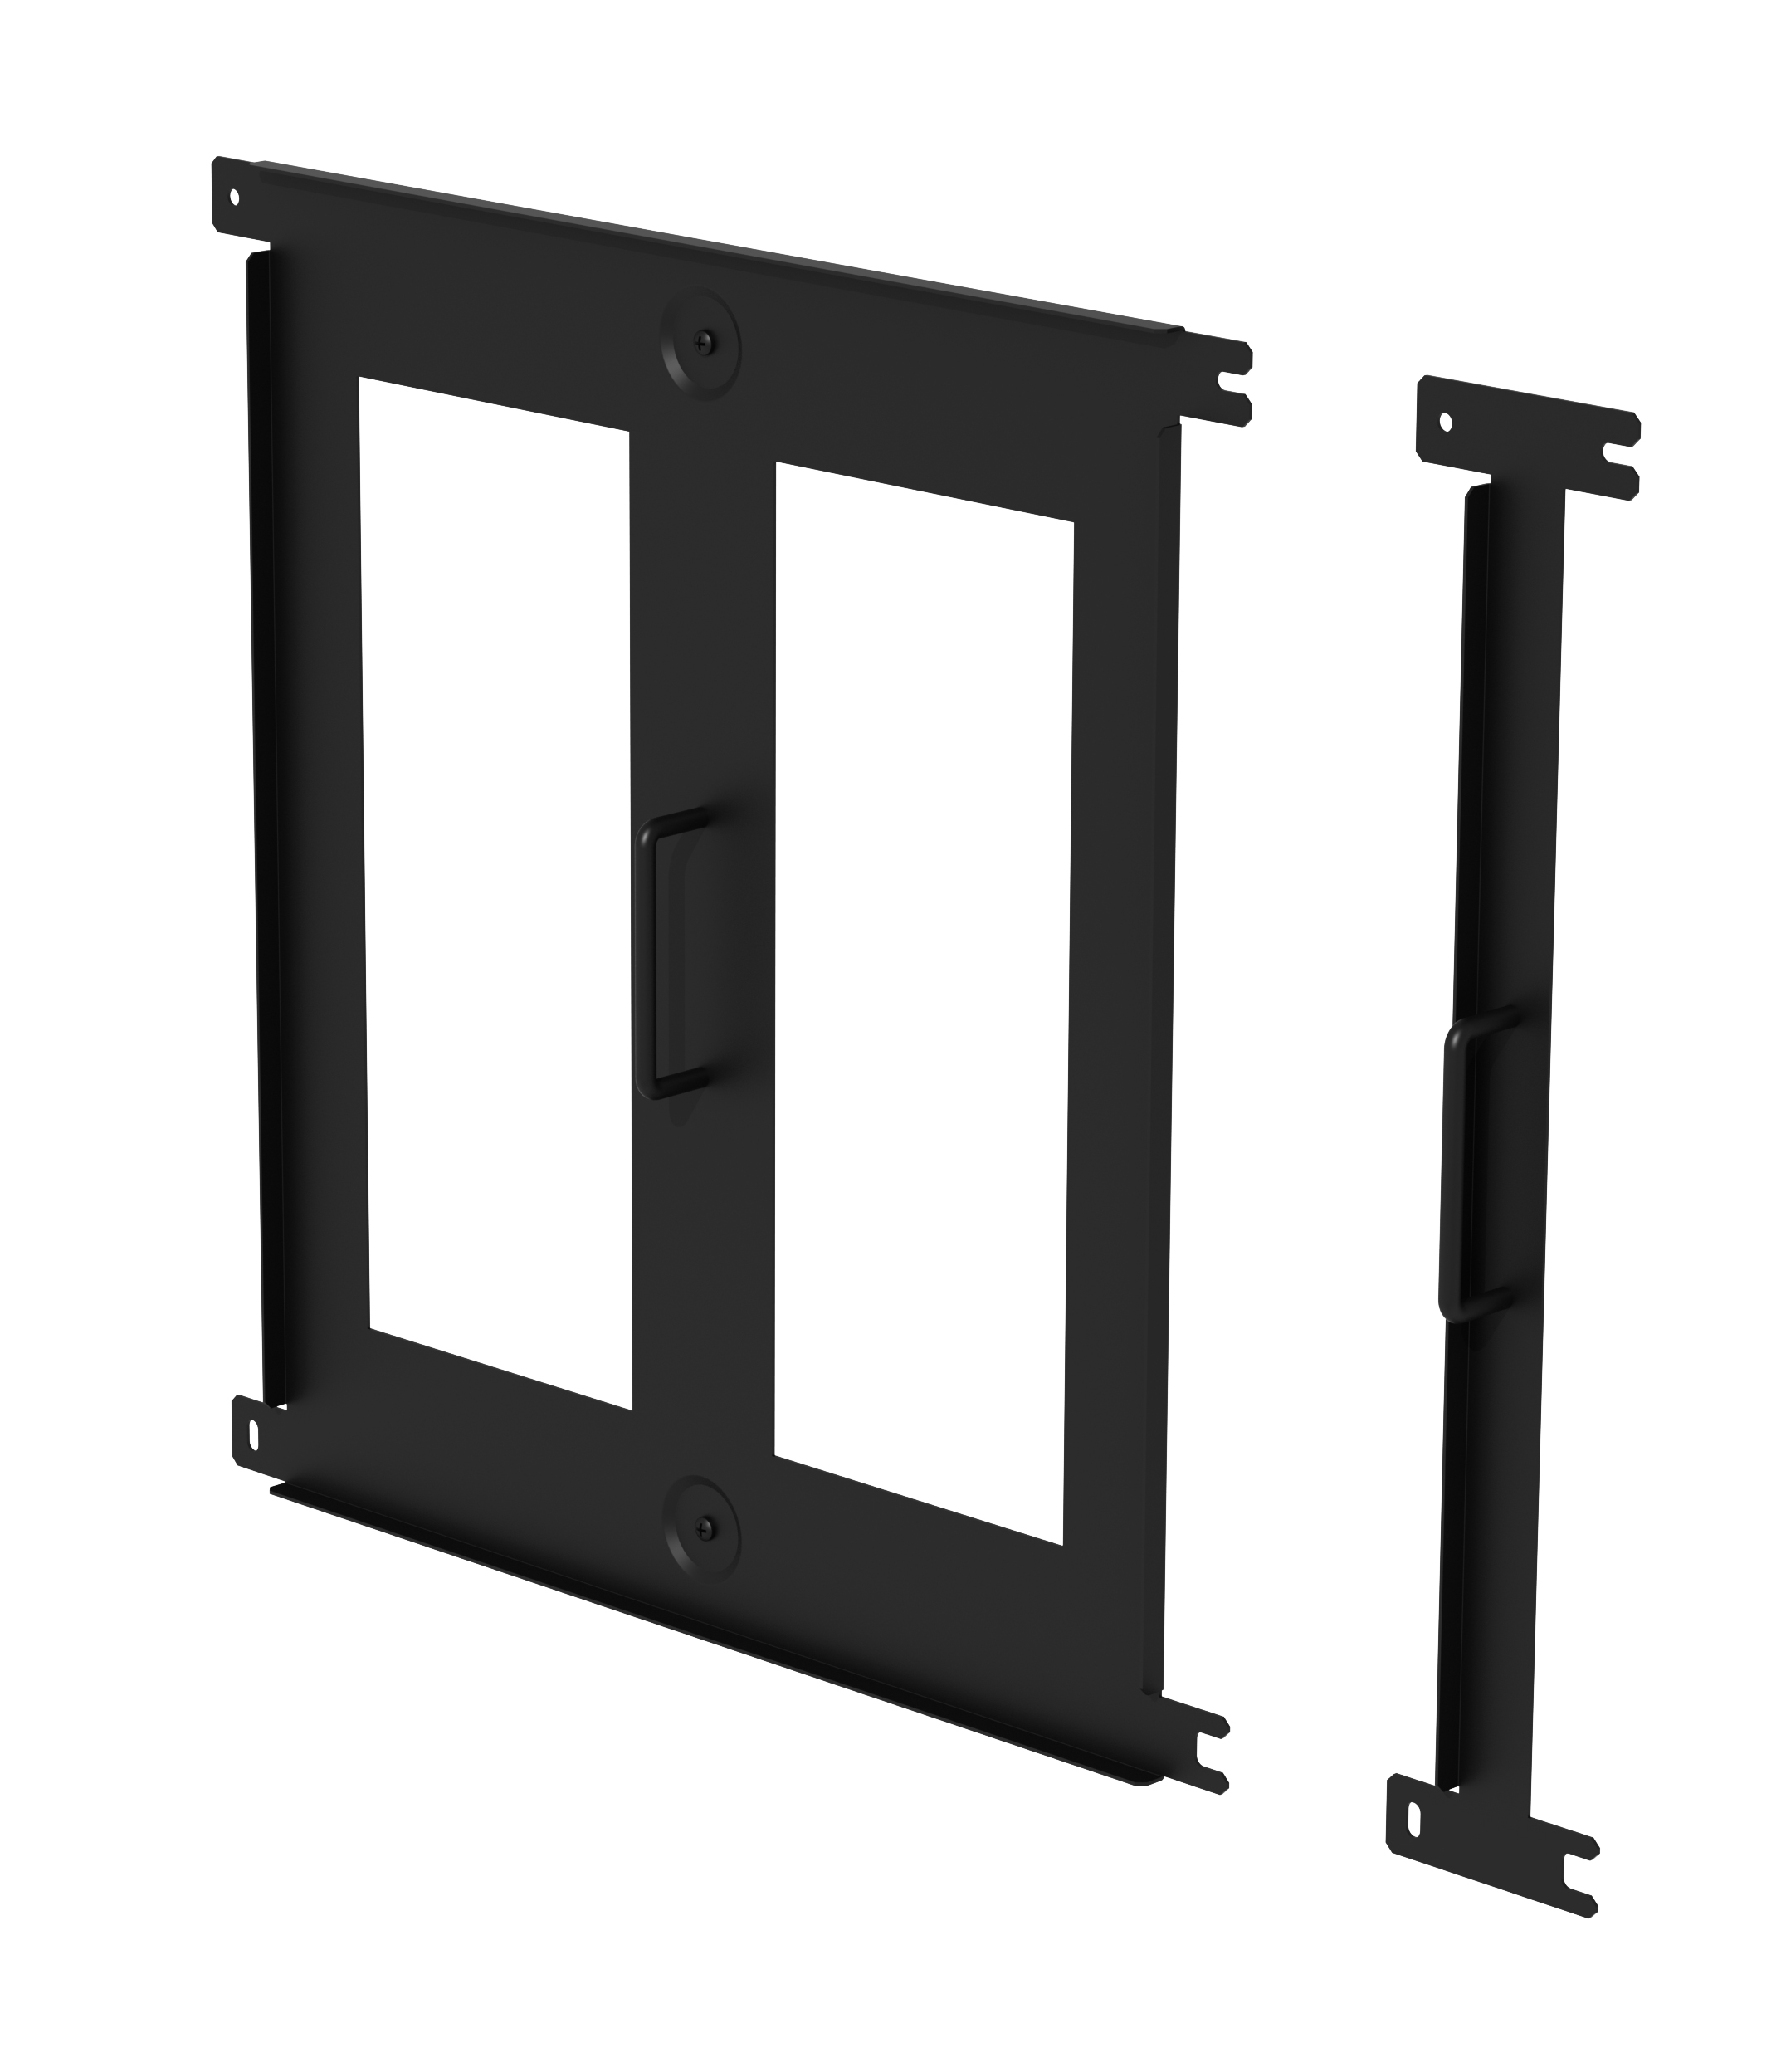 DS-VWRS090 Reusable Video Wall Spacer